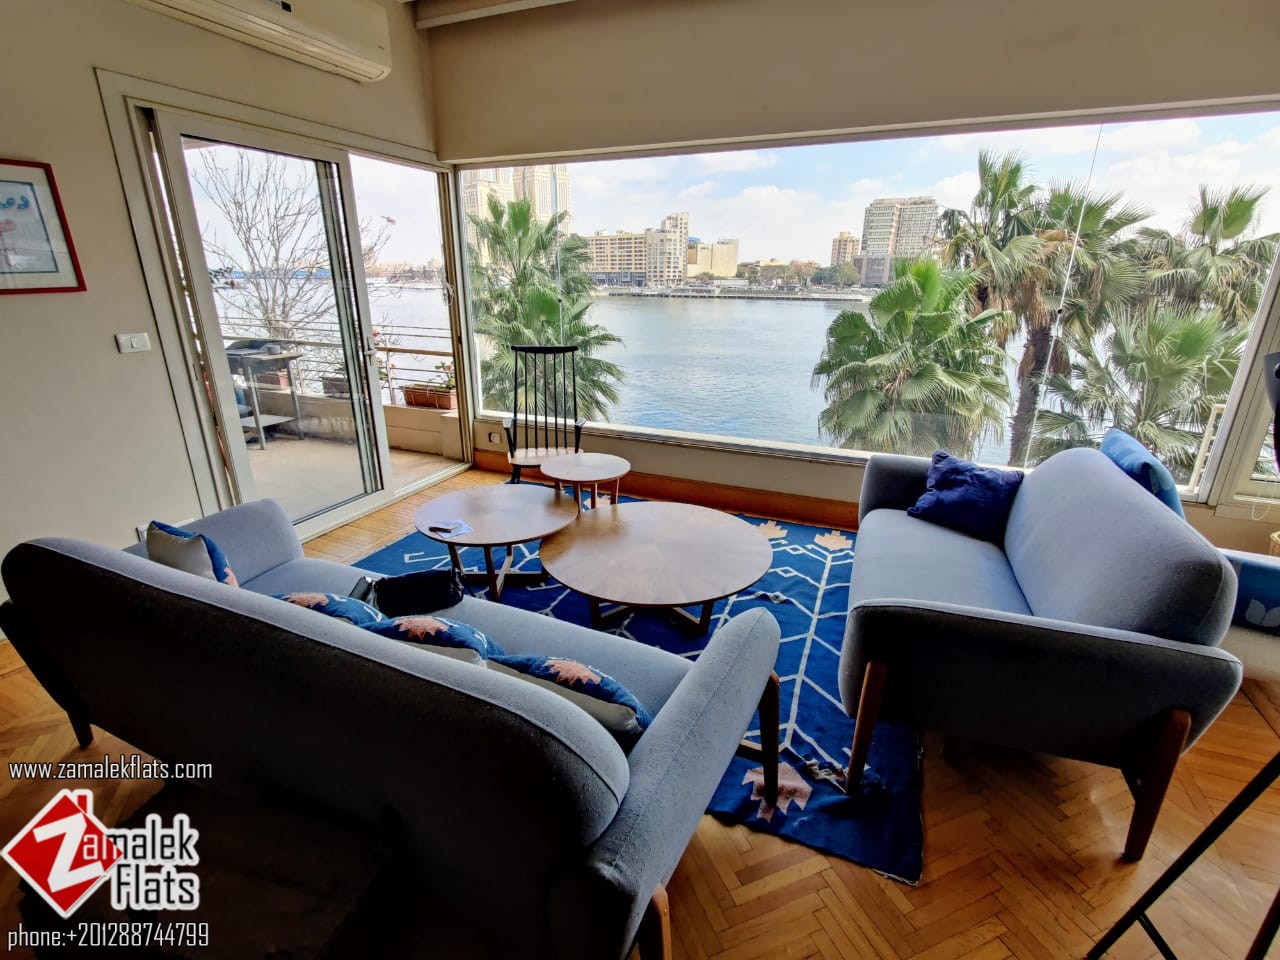 Stunning Nile View Apartment in Historical Building in Zamalek